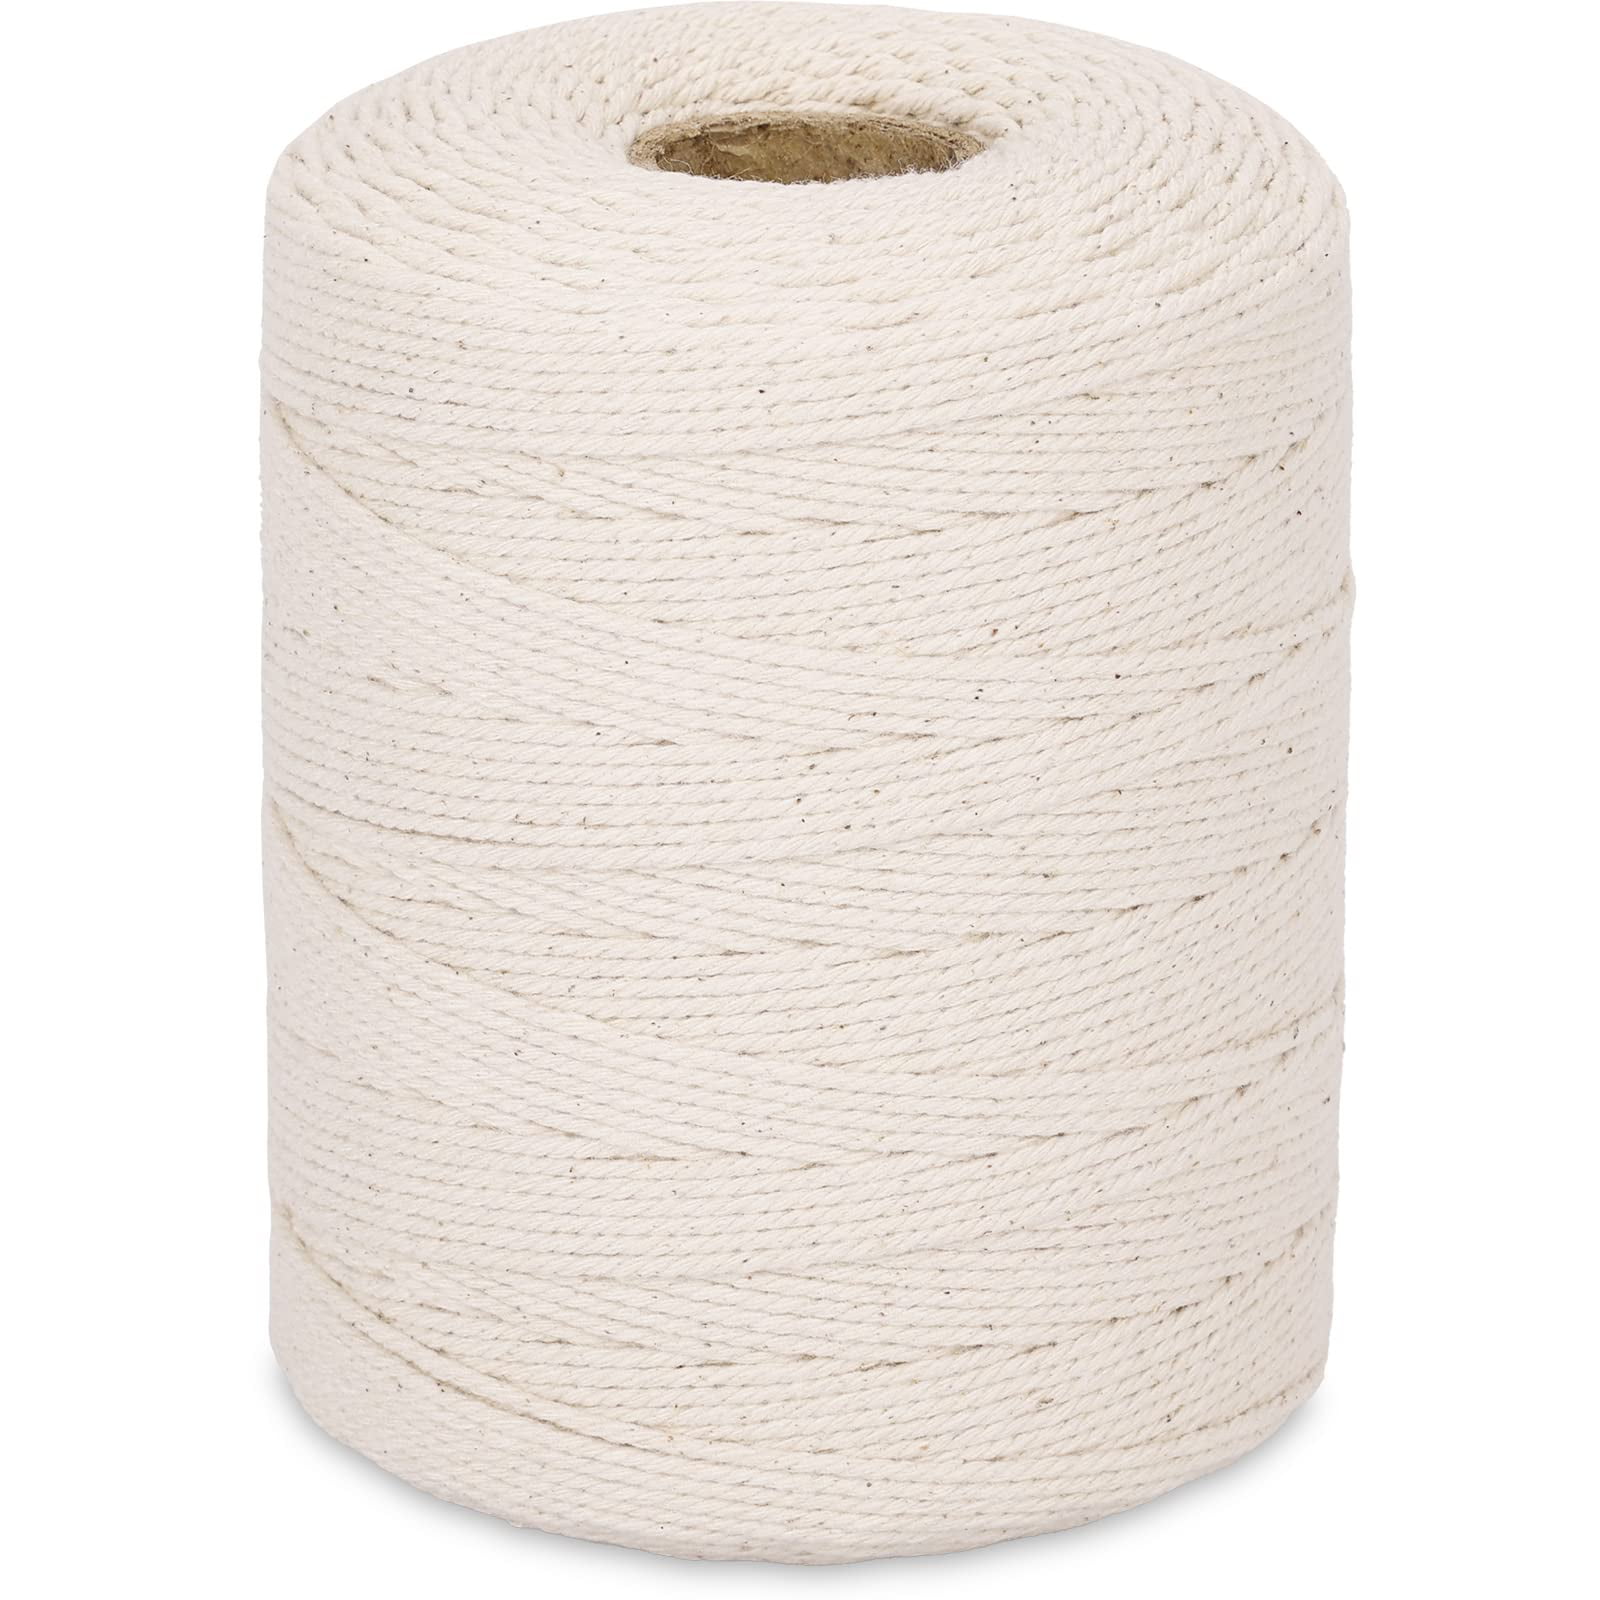 1000m/3280FT Butchers Twine Cooking Twine 3Ply 1mm Thick White Cooking  String Safe Kitchen Cotton String Bakers Twine Kitchen Cooking Butcher  String